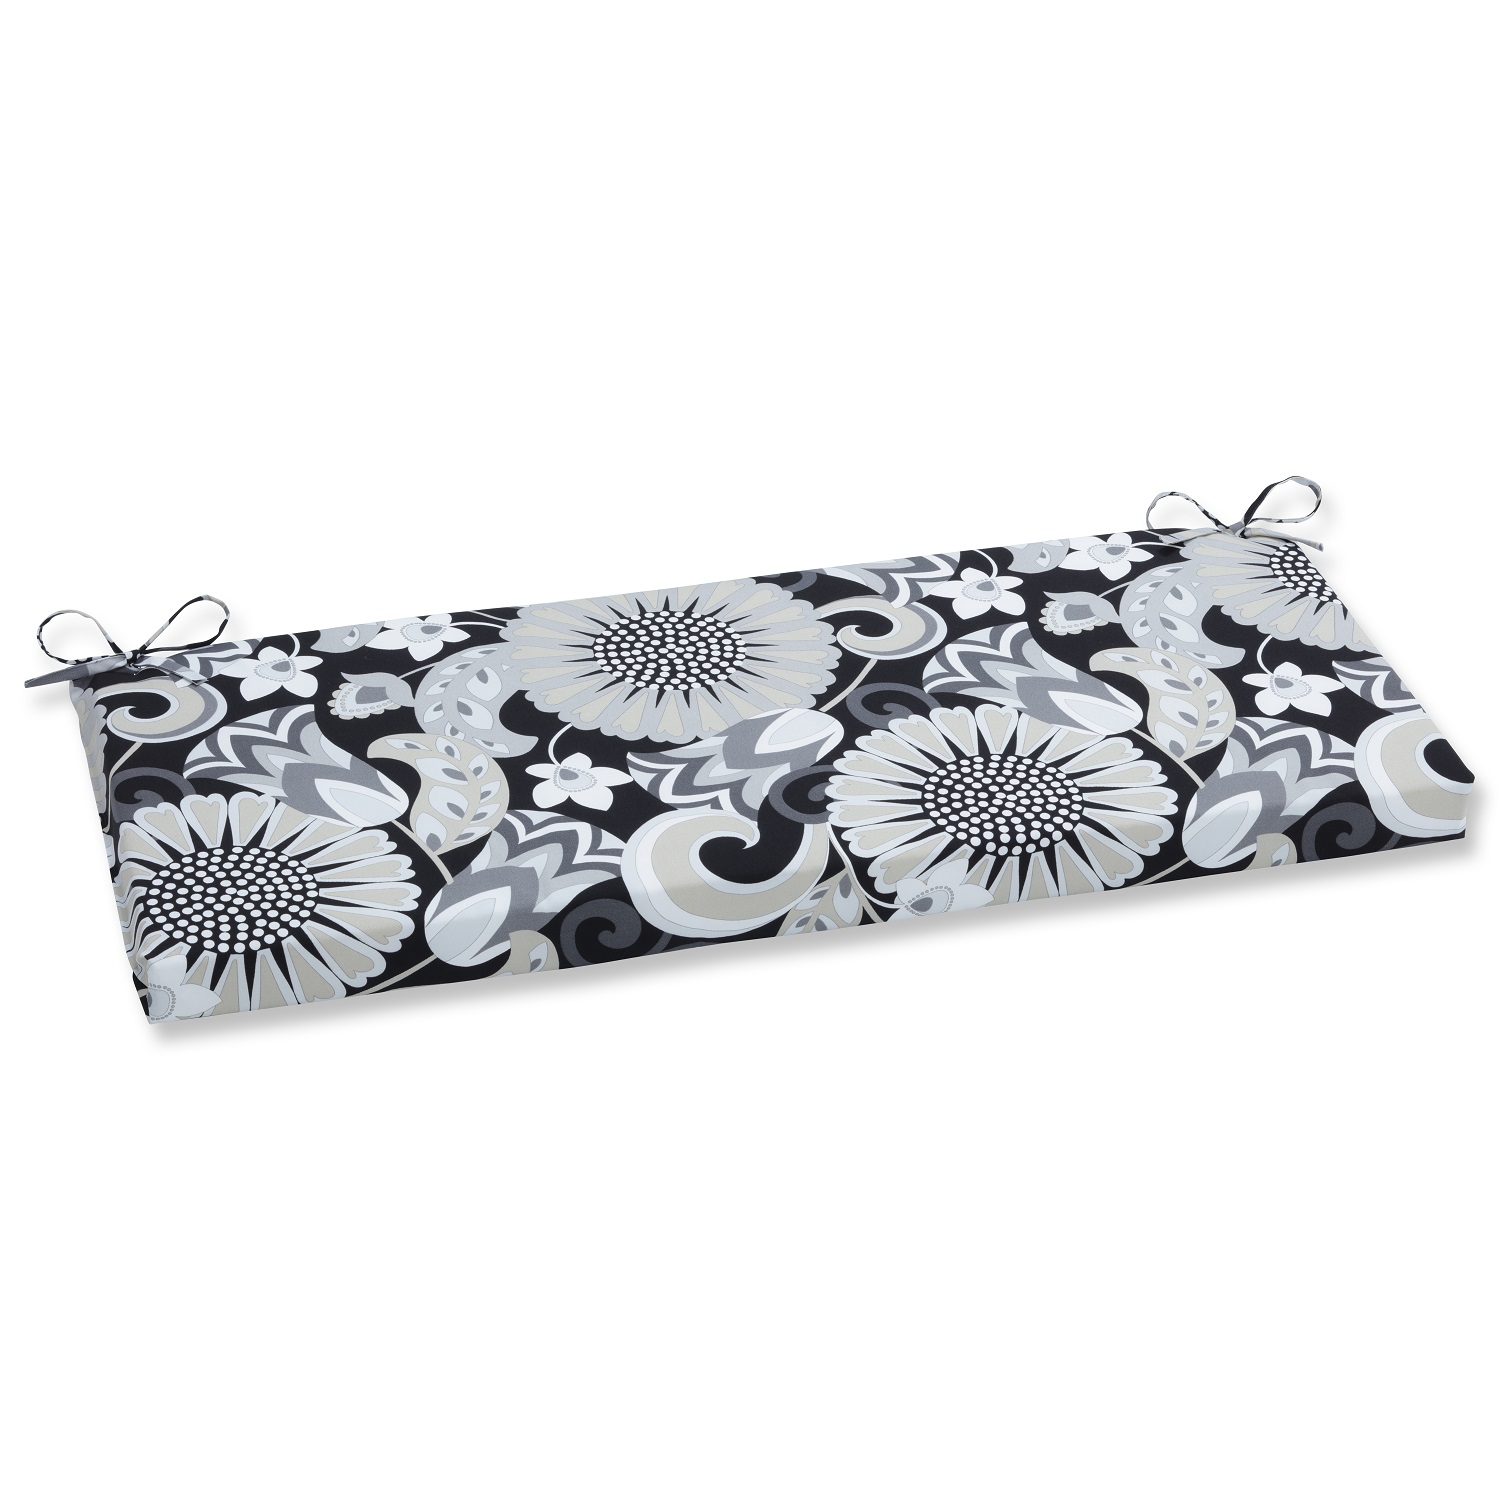 Pillow Perfect 45" Imperial Black and Gray Rectangular Floral Outdoor Patio Bench Cushion